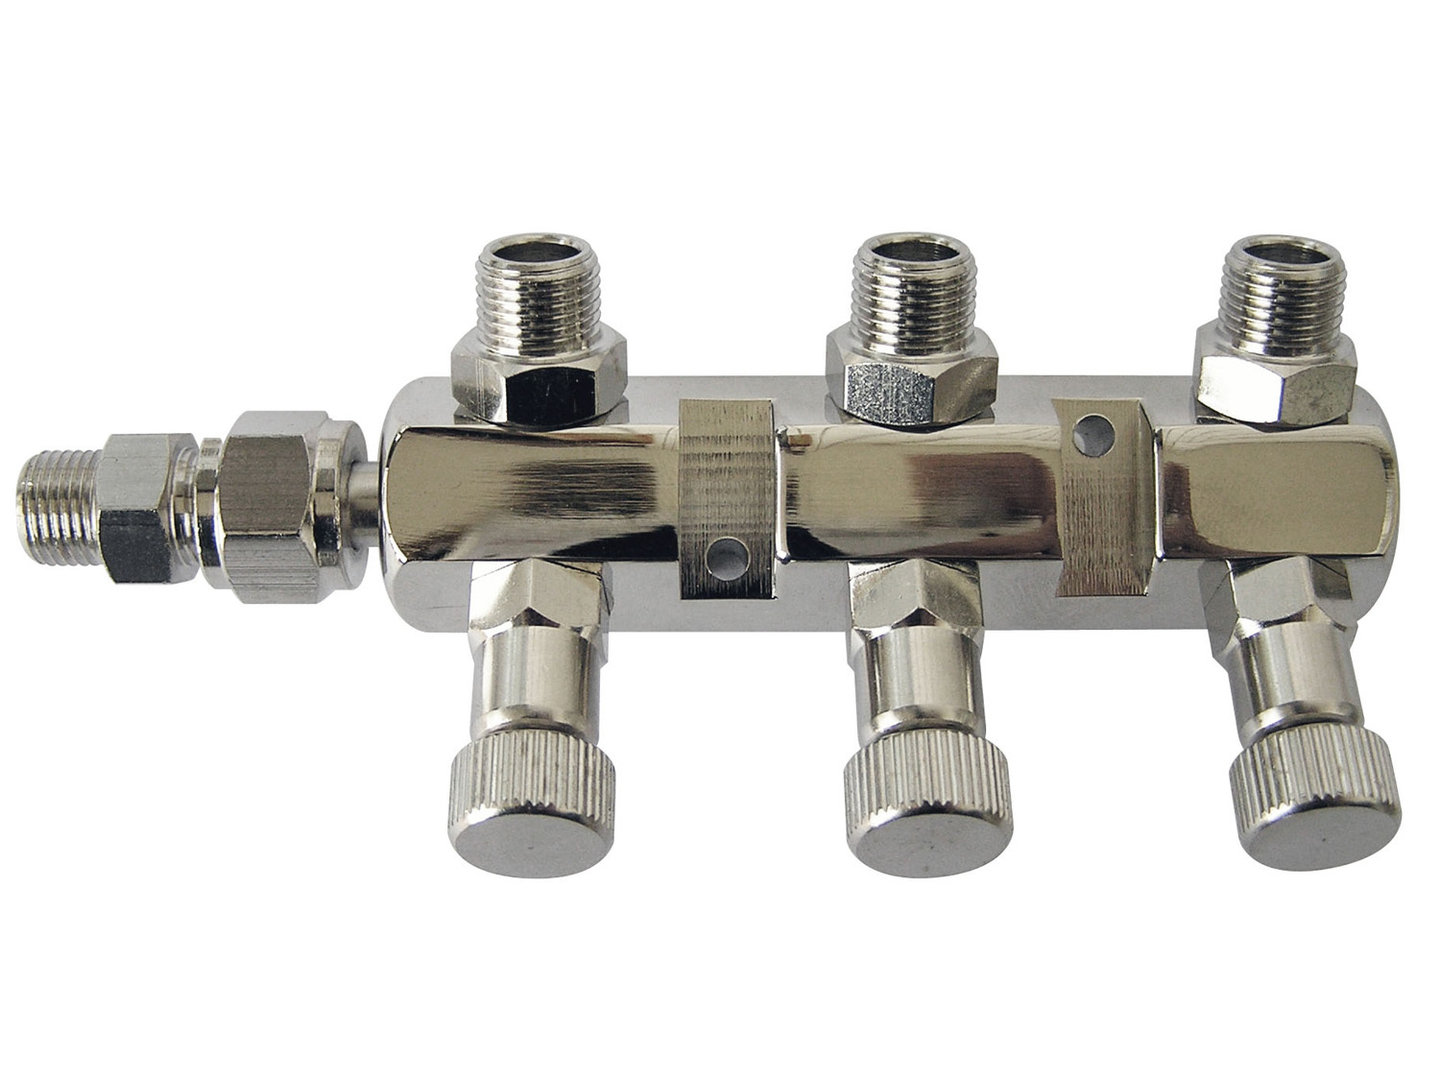 Anest Iwata Sparmax 1-3 Manifold 1/8" with Air Control Valves